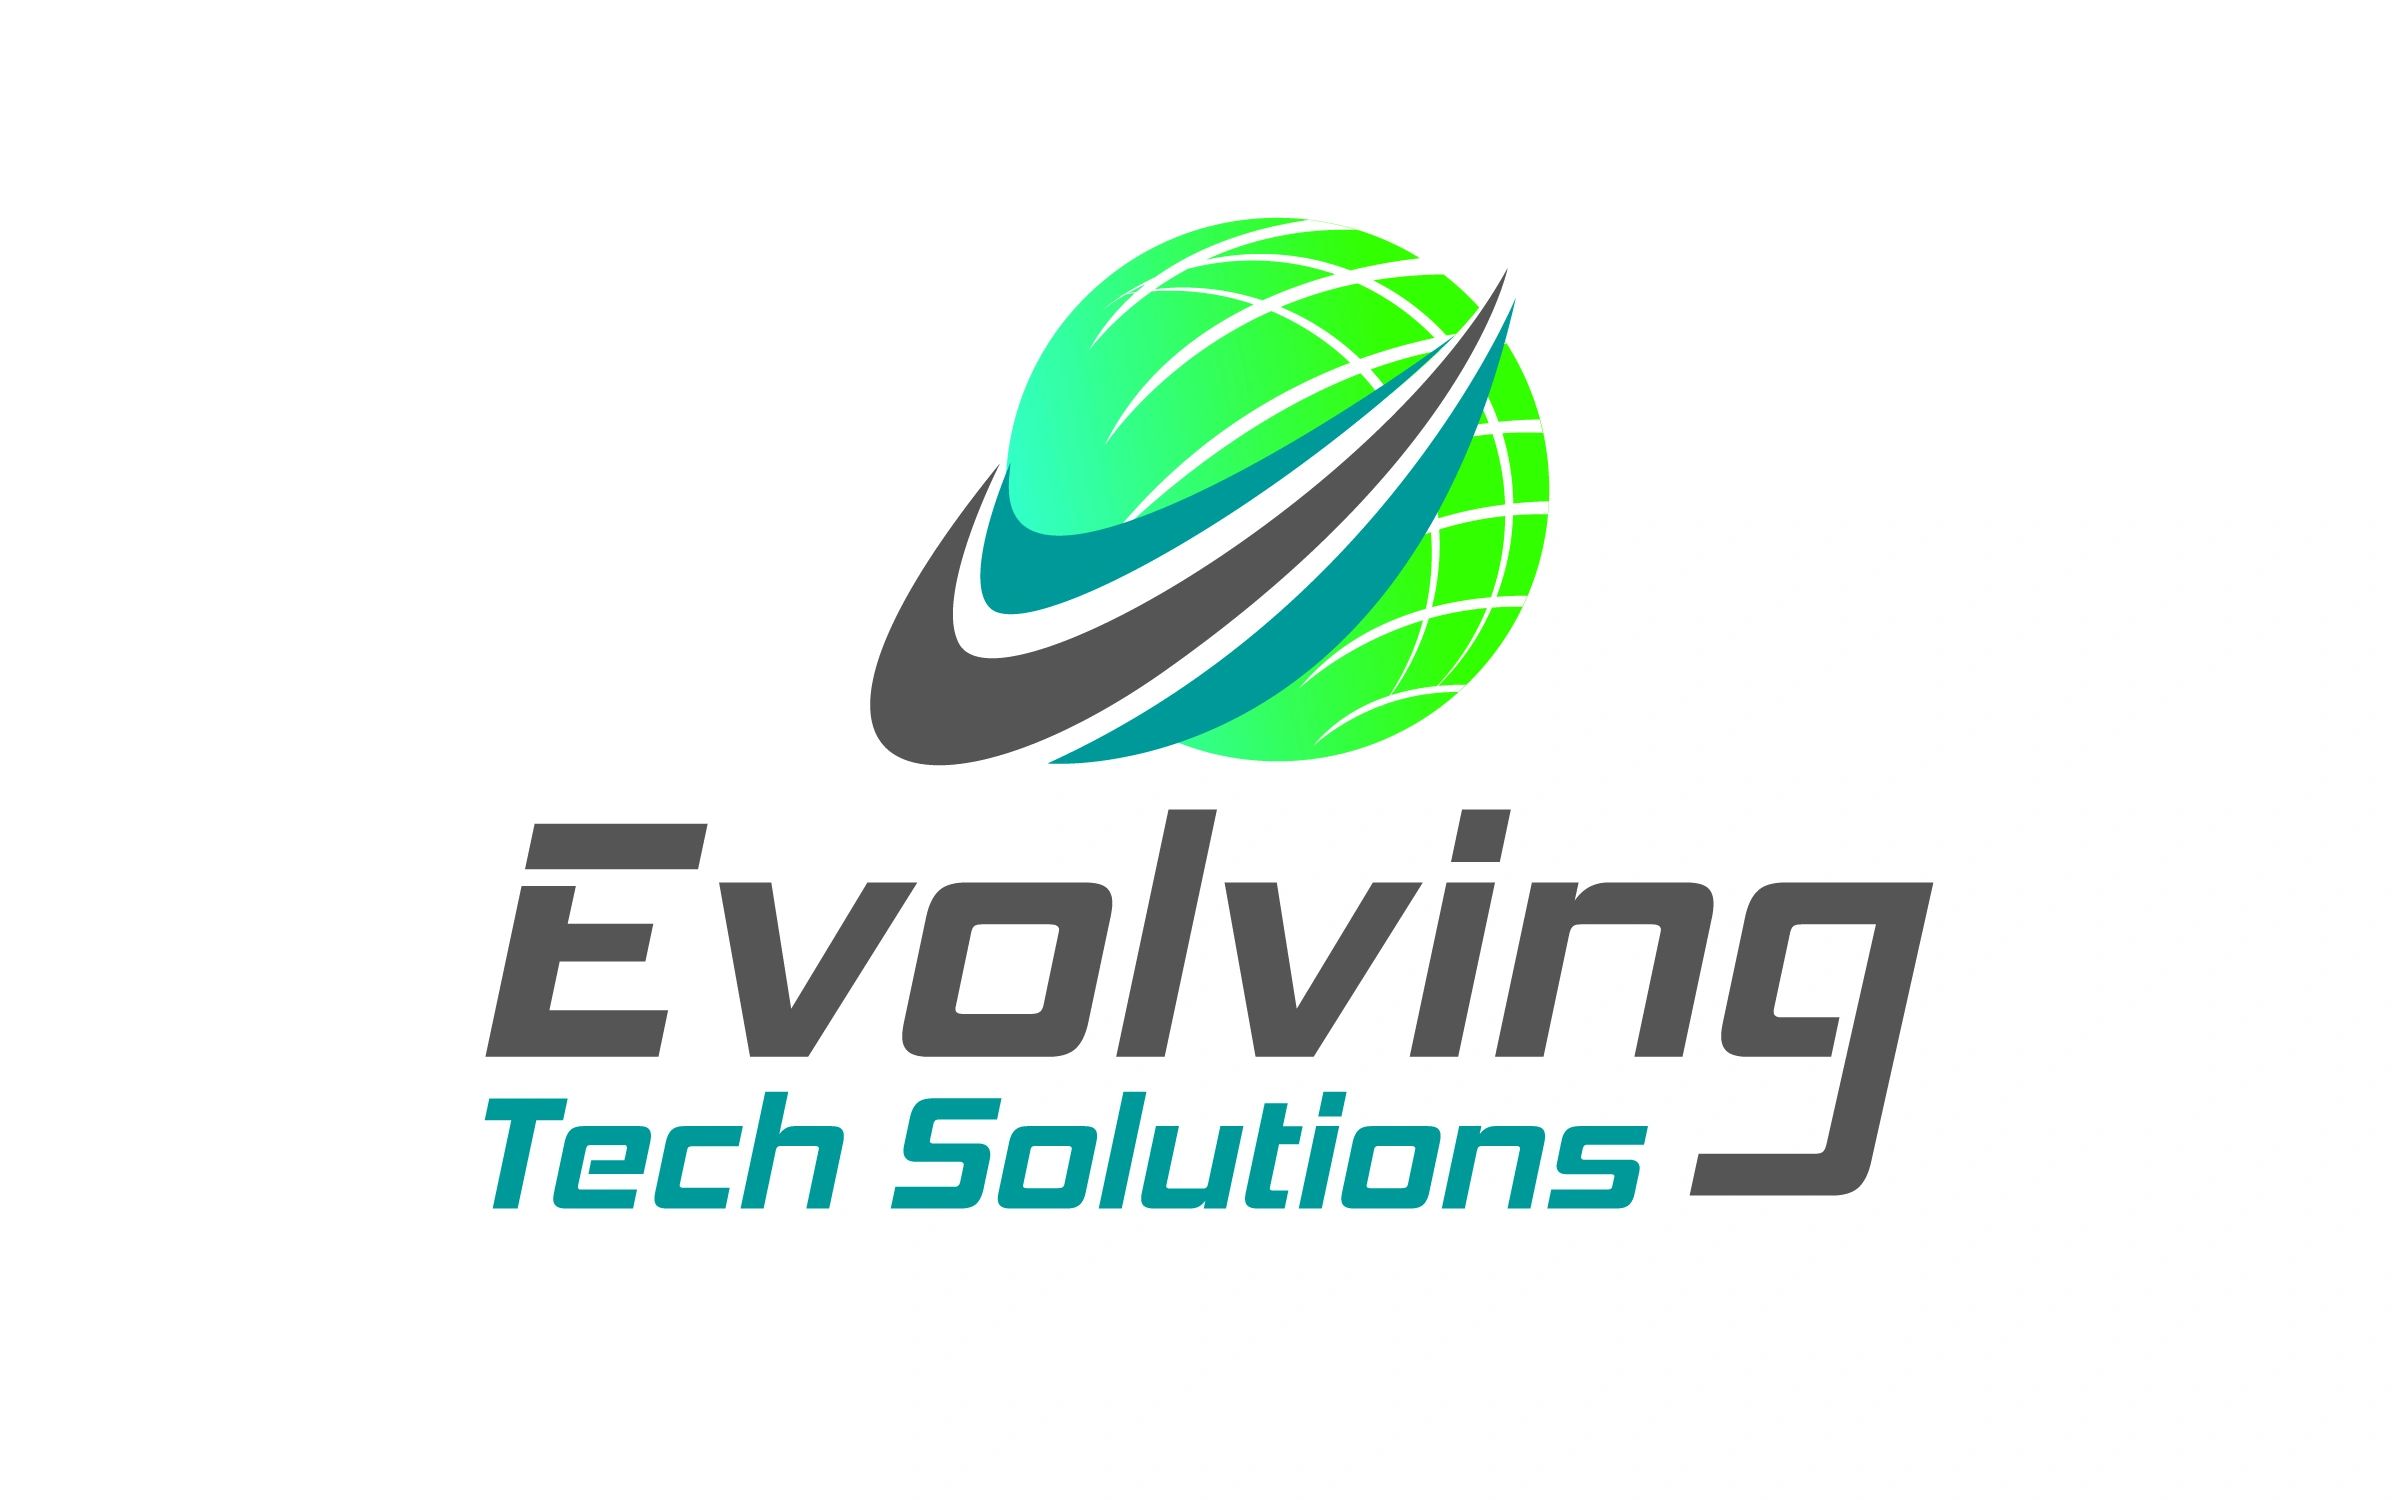 Evolving Tech Solutions ad